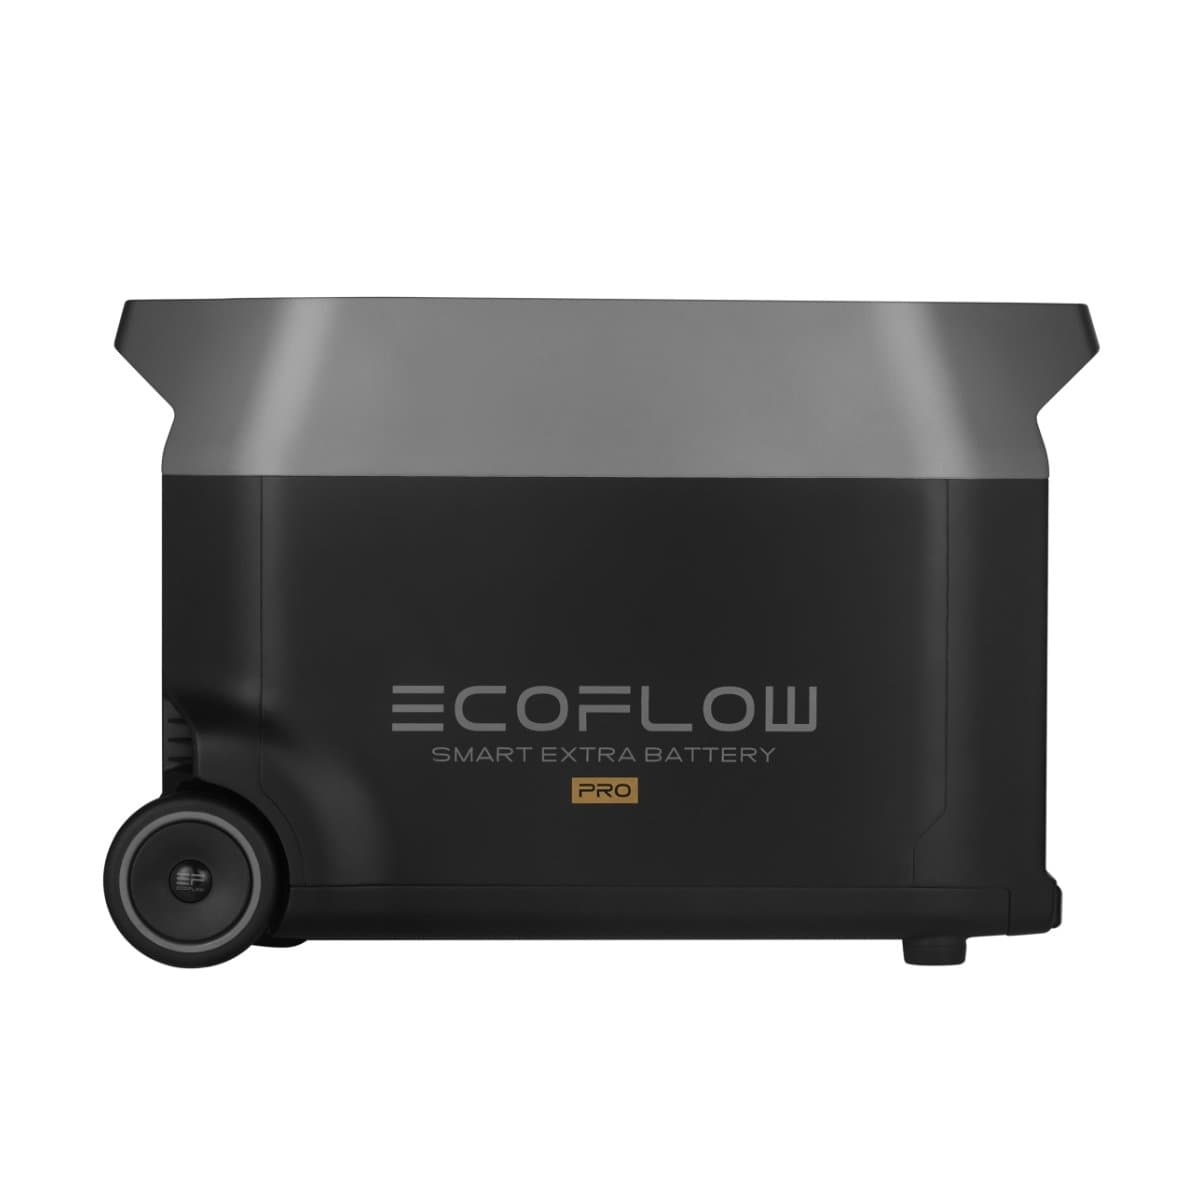 EcoFlow DELTA Pro Smart Extra Battery (Recommended Accessory)